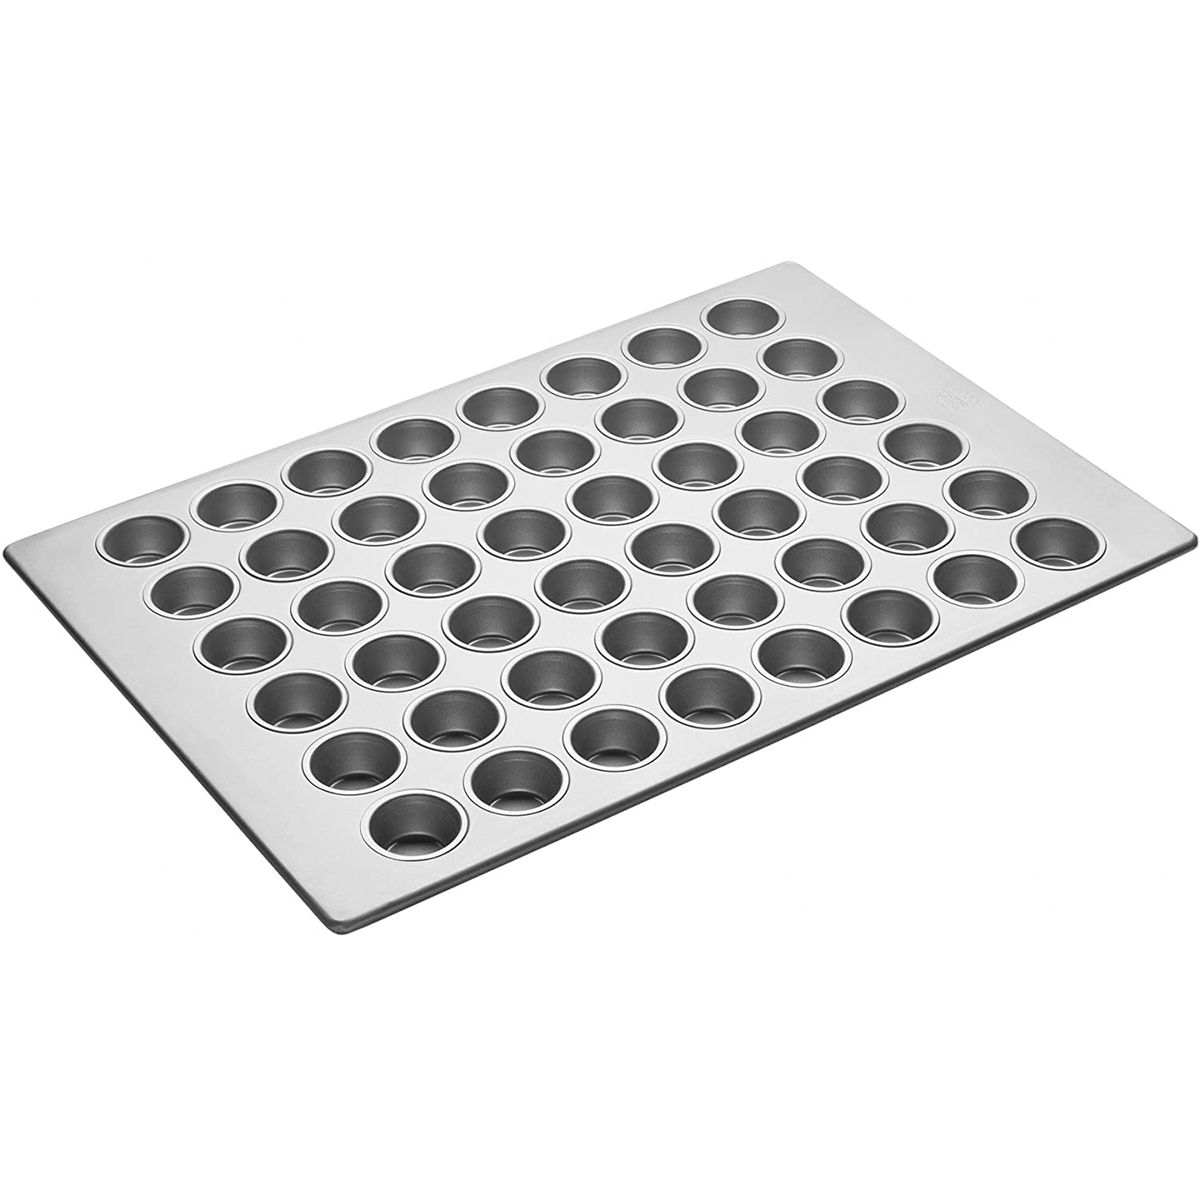 Aluminized Steel Mini Muffin Pan Glazed 48 Cups. Cup Size 2-1/16" x 1-1/8" Deep. Overall Size 18" x 26"